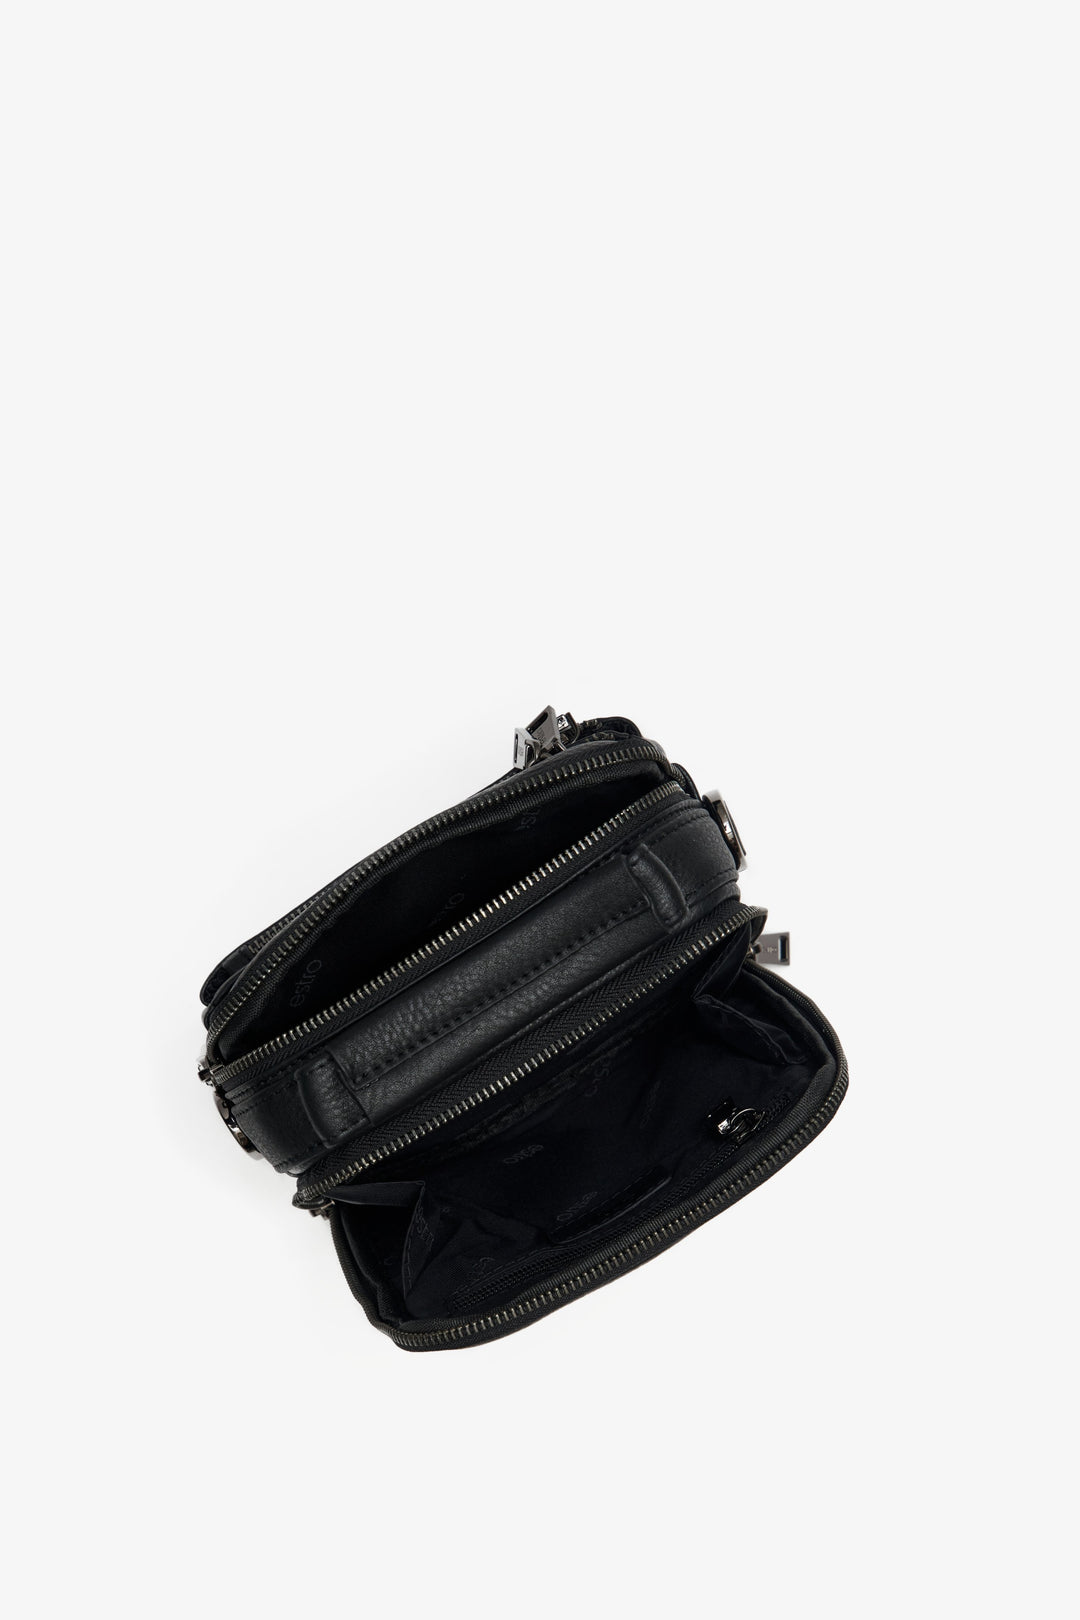 Men's black pouch made of genuine leather by Estro - close-up on the interior design.